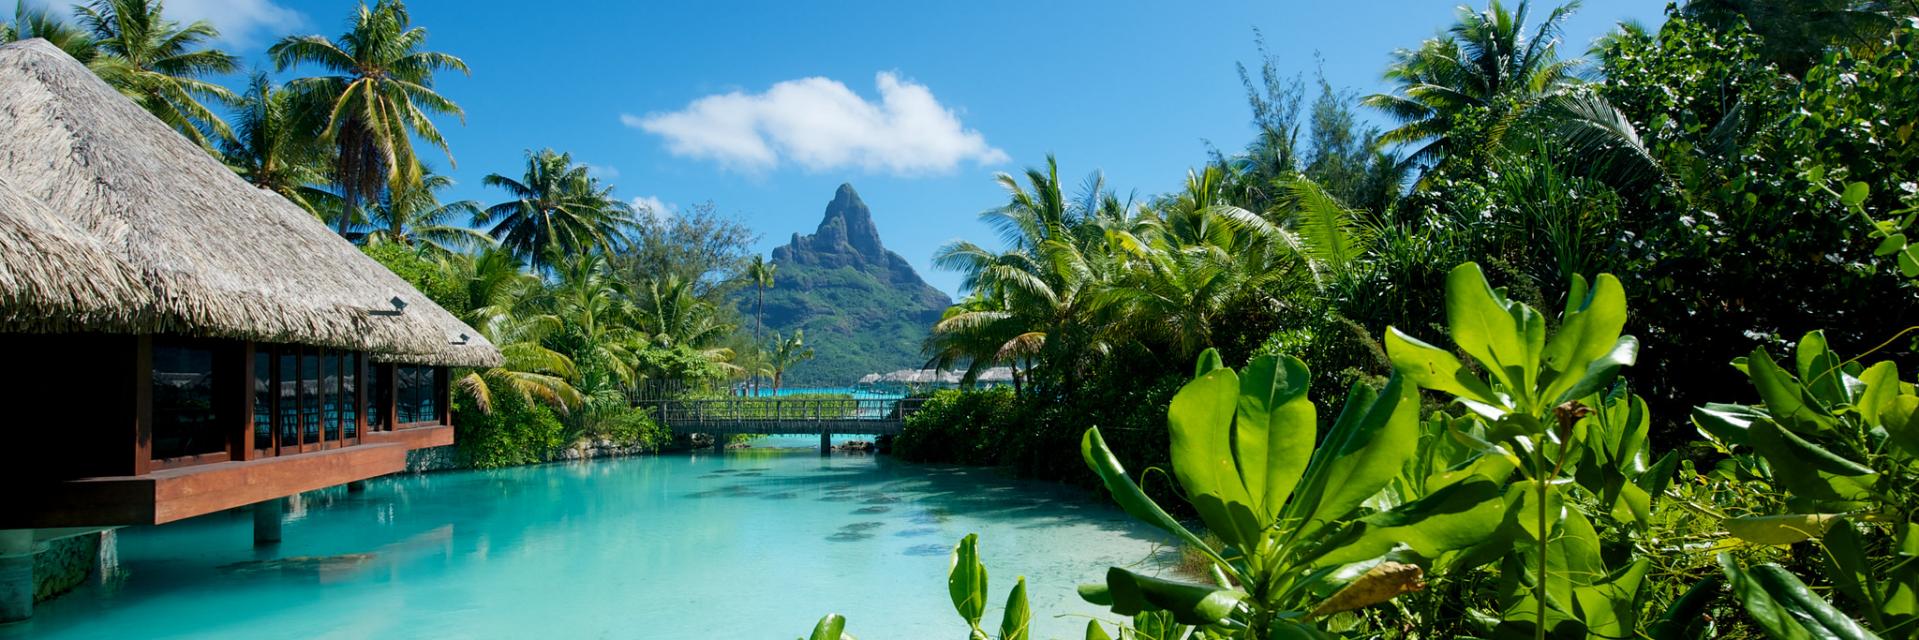 Overwater bungalows surrounded by lush jungle.